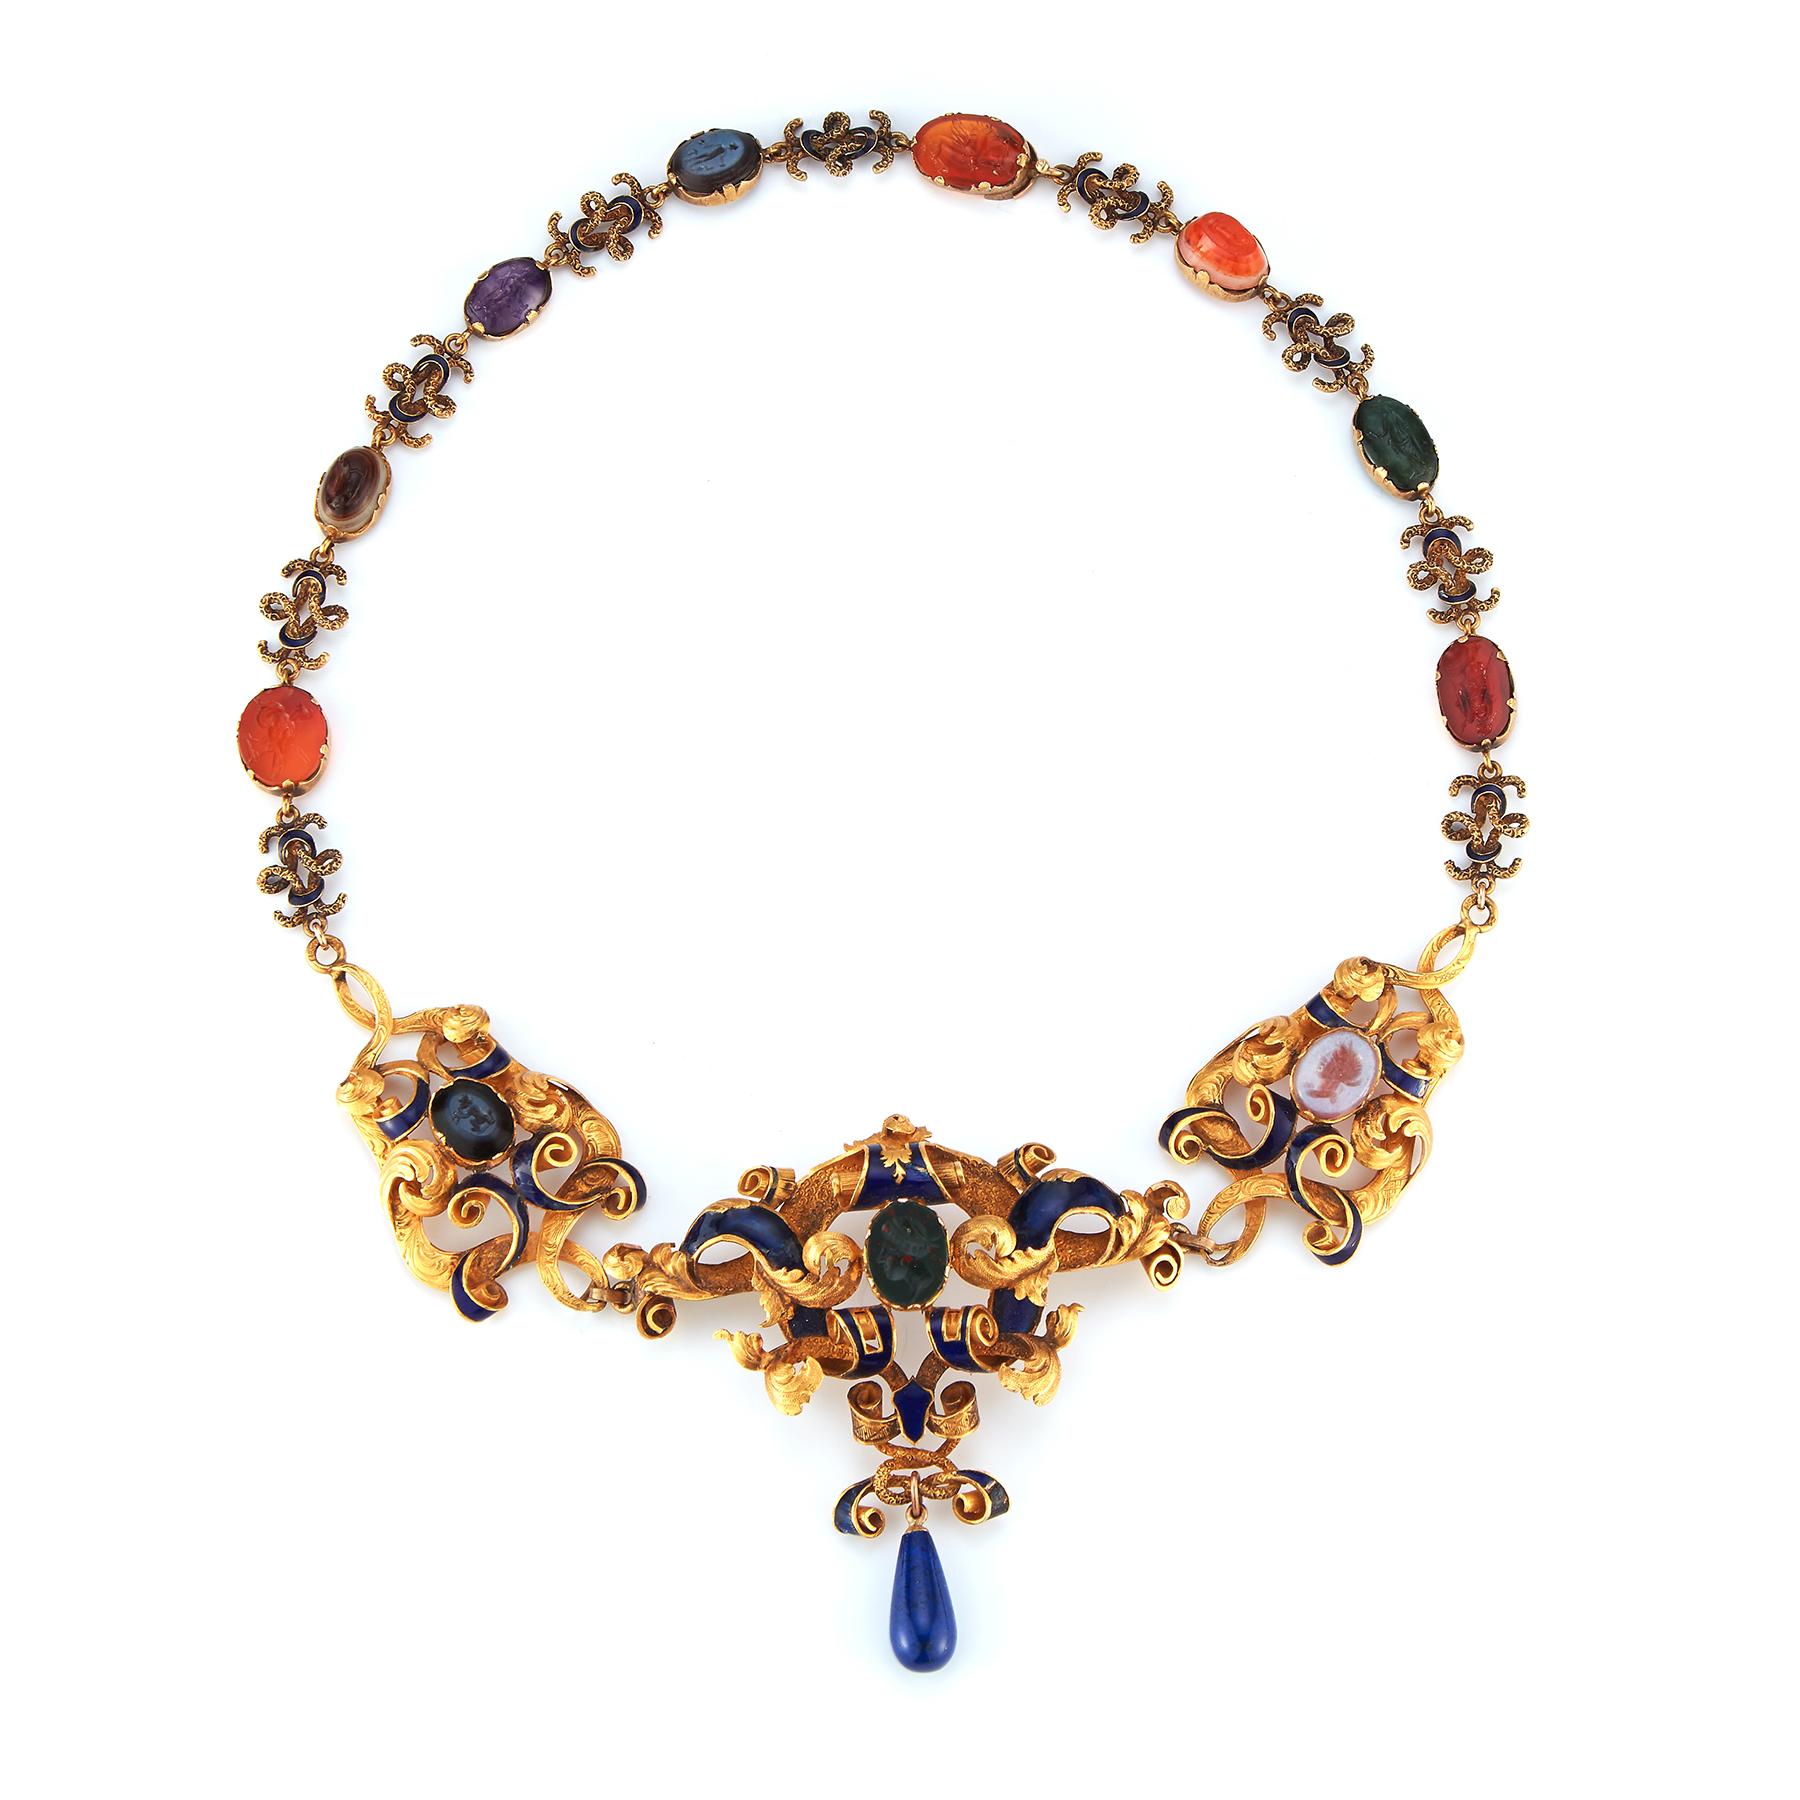 Very Rare Antique Carved Intaglio Enamel Necklace

Multi Gem intaglios in numerous hardstones (carnelian, bloodstone etc),  with enamel accents set in 14K yellow gold.

Made circa 1900

Measurements: 15.75